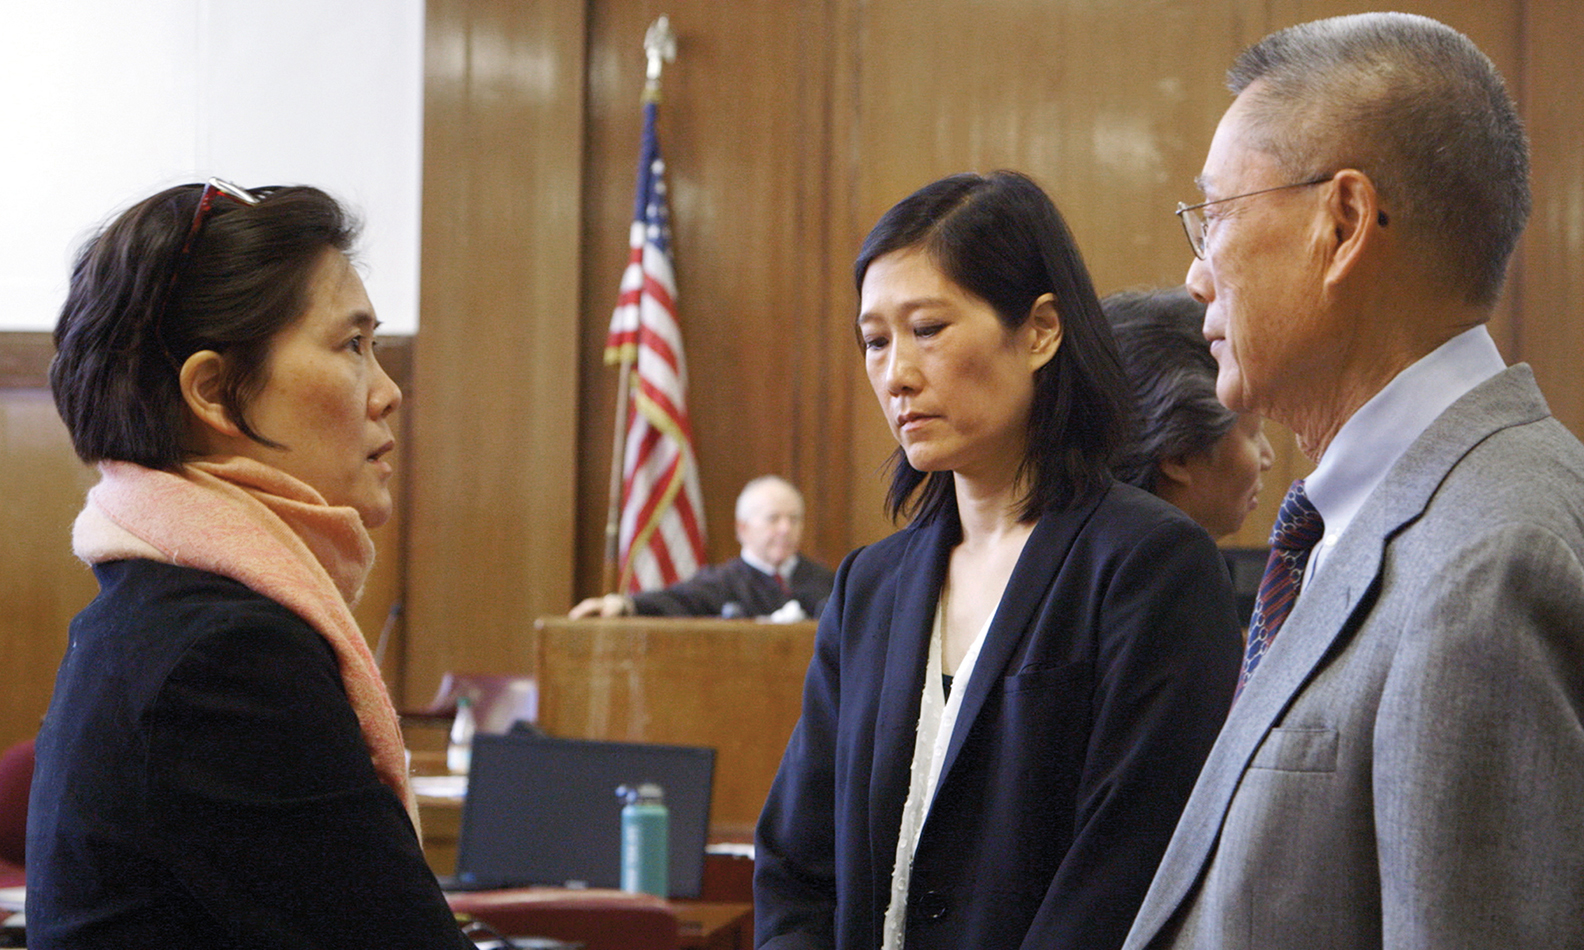 After a three-month trial, from left, Jill, Vera, and Thomas Sung await the verdict in the State Supreme Court in Manhattan.